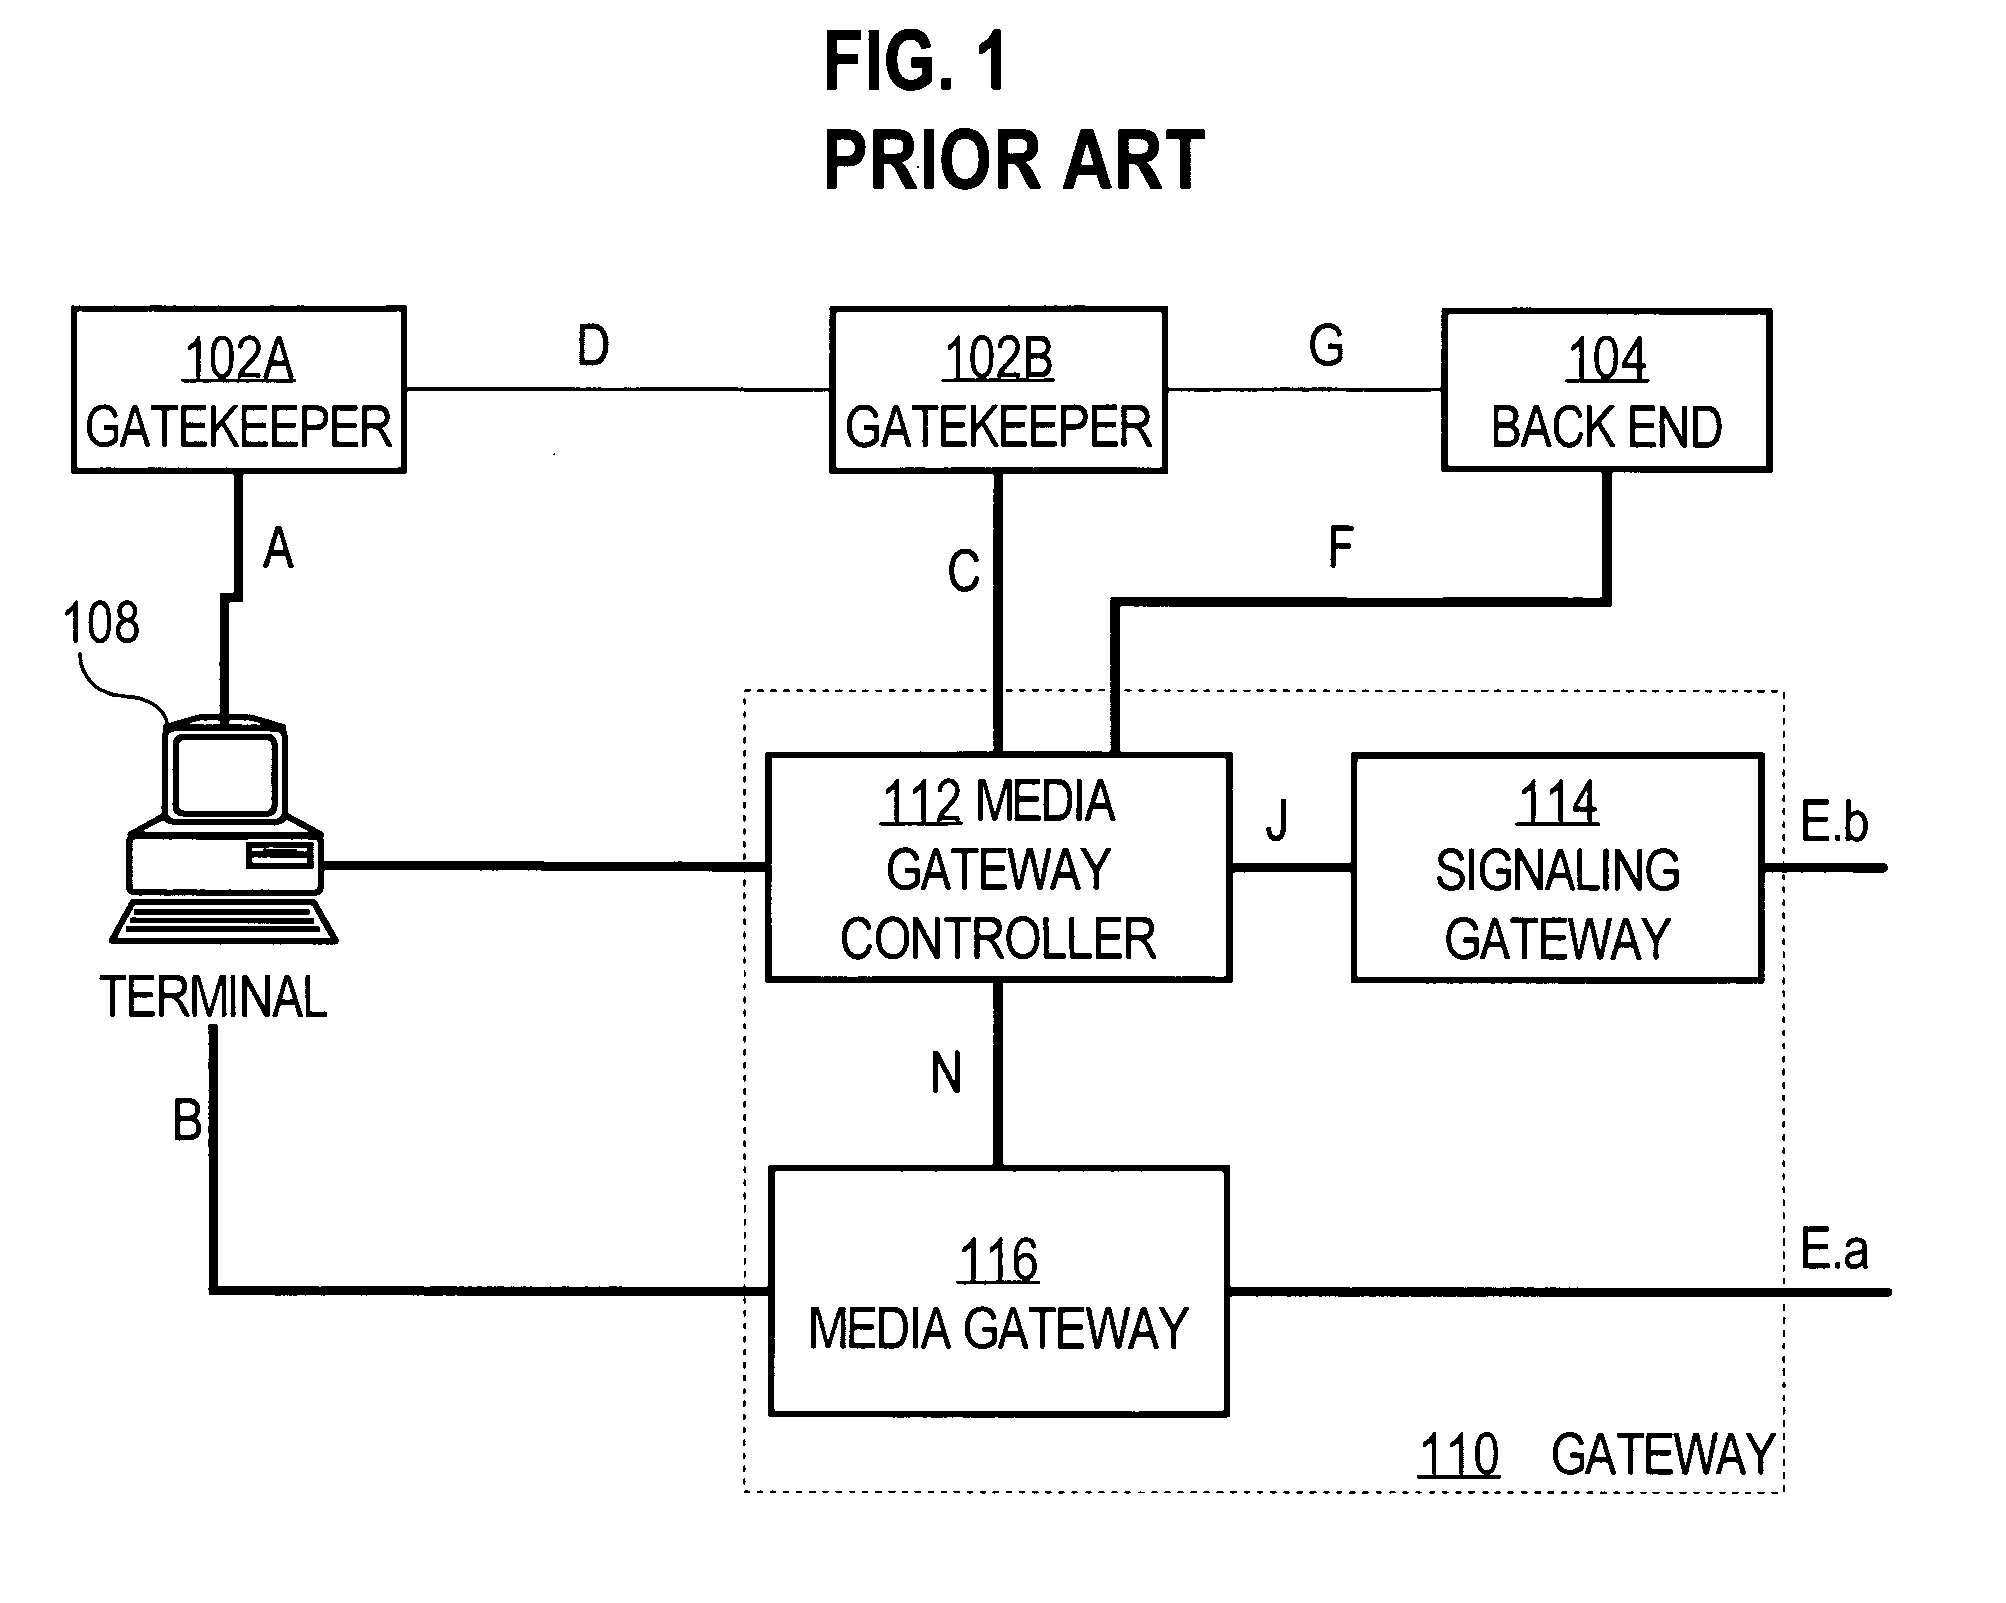 Authenticating endpoints of a voice over internet protocol call connection